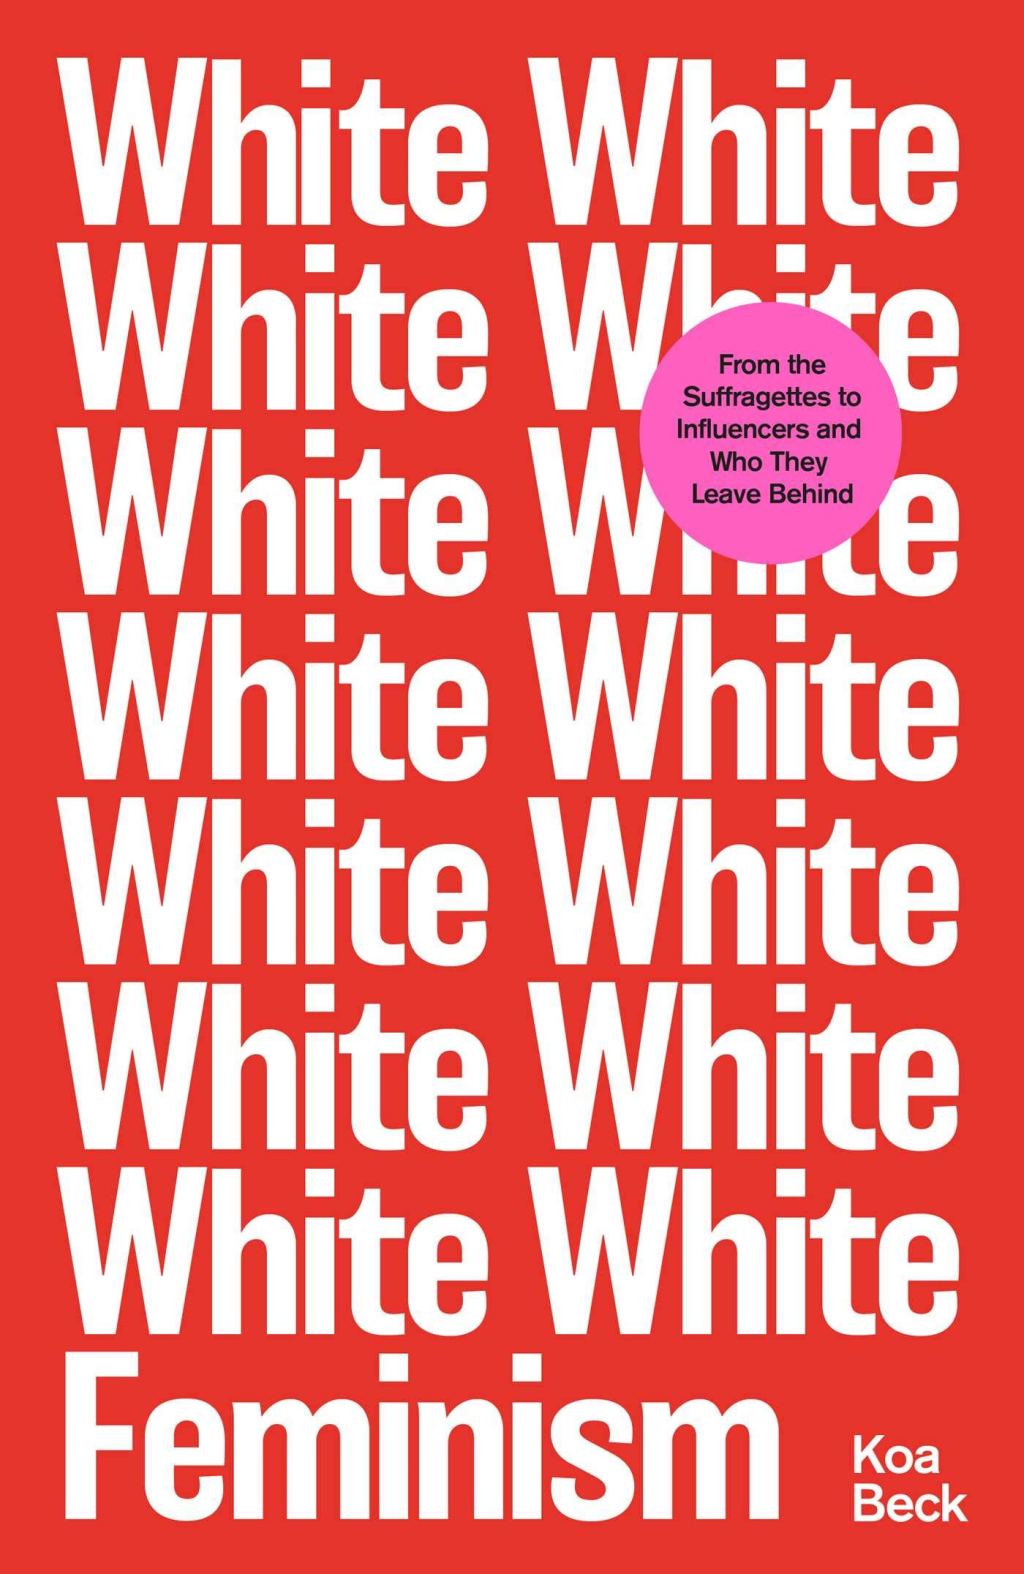 White Feminism by Koa Beck is out now (Simon & Schuster, £16.99)